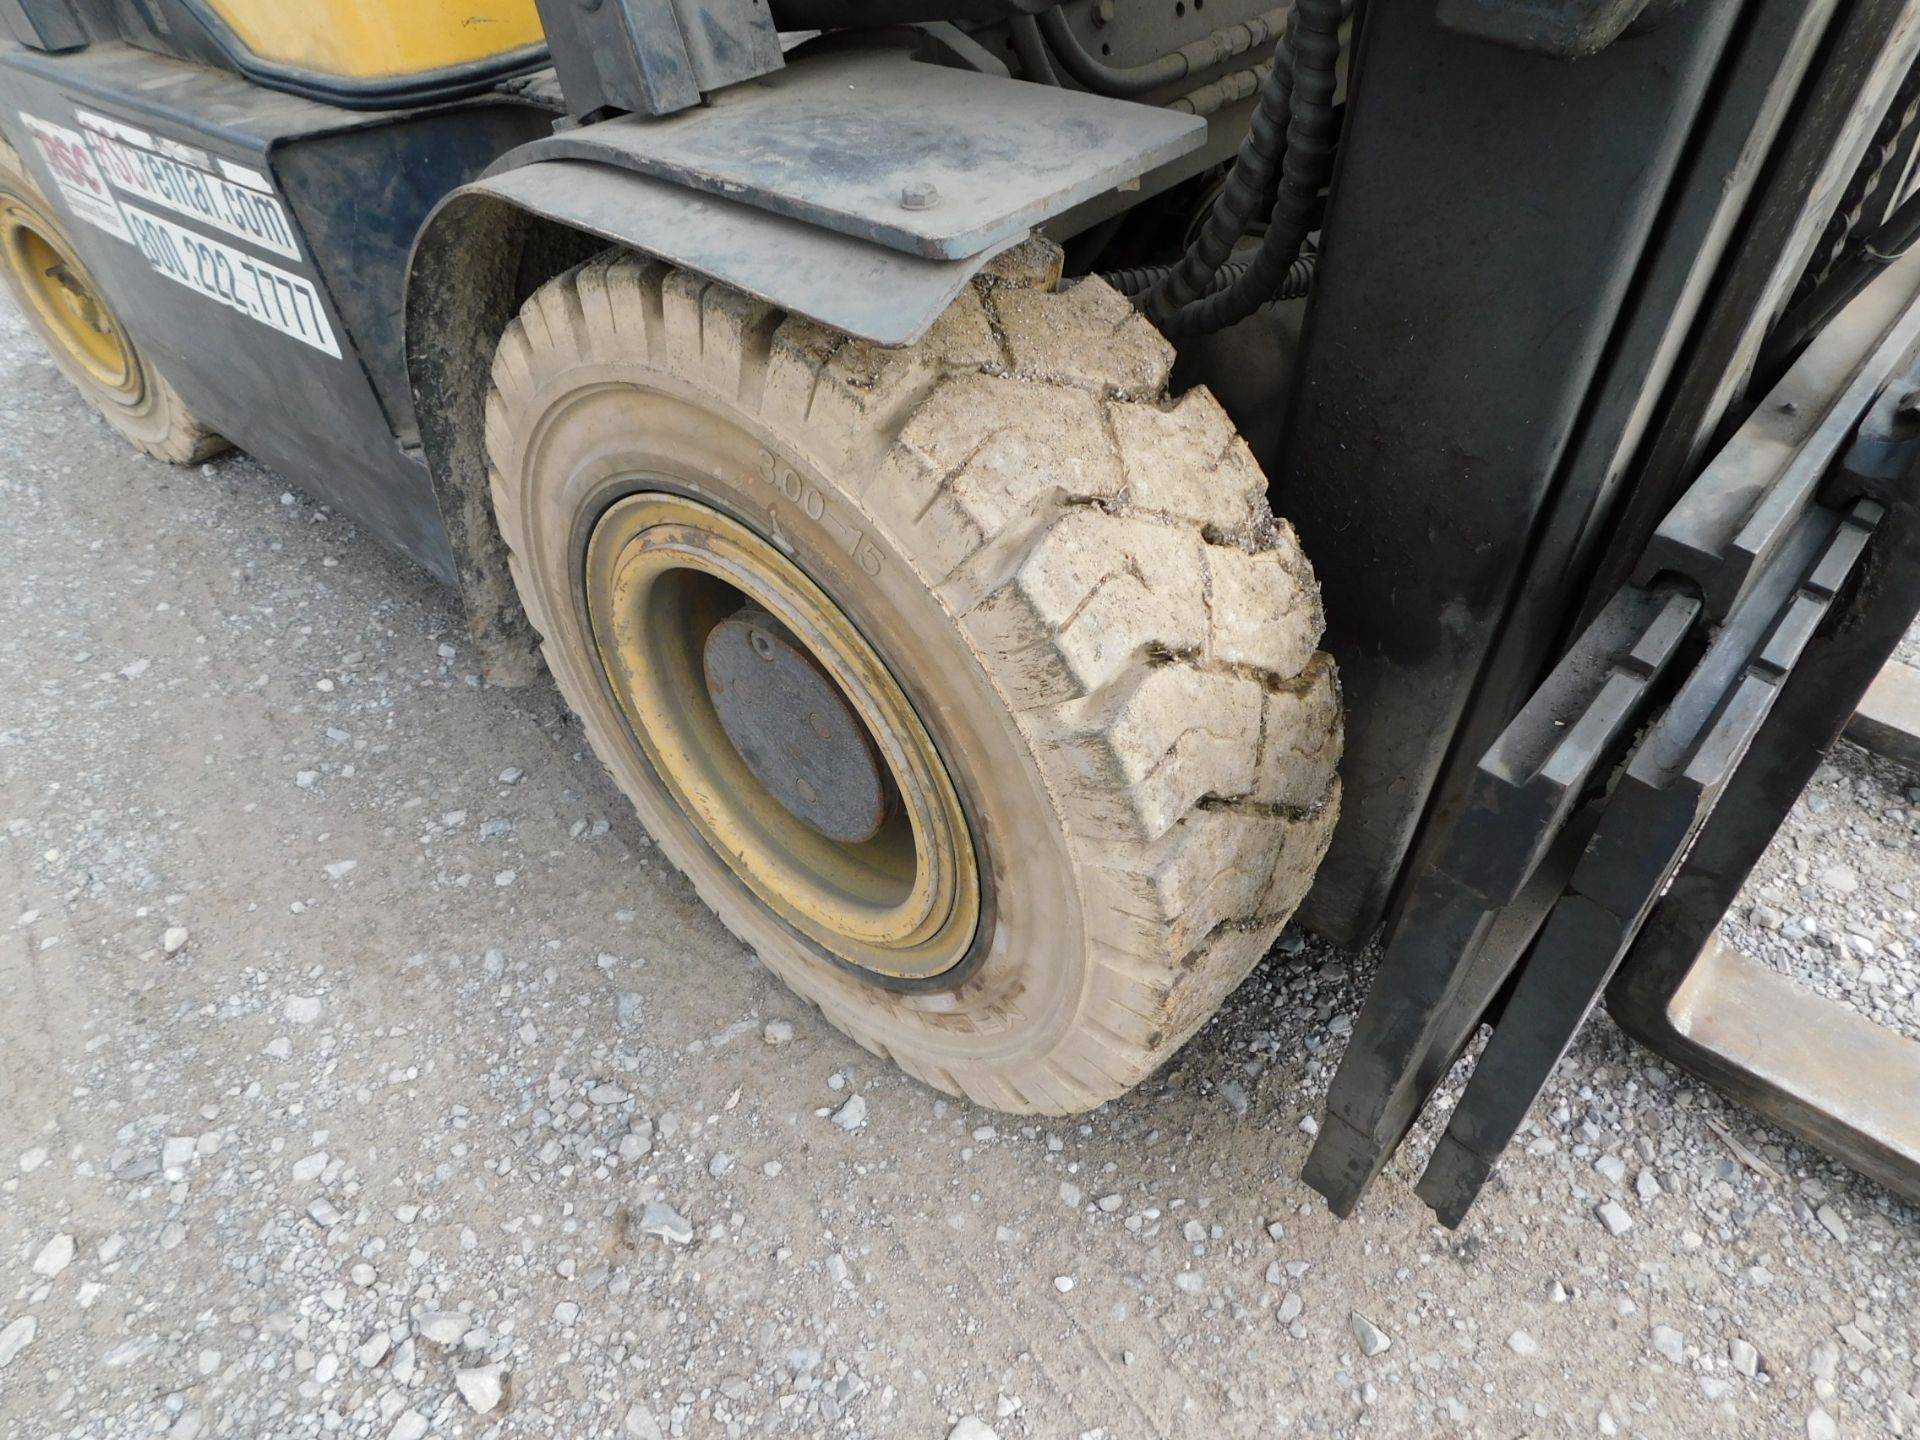 Daewoo Model G35S-2 Forklift, SN G2-00191, 6,700 lb. cap., LP, Solid Pneumatic Non-Marking Tires, - Image 12 of 20